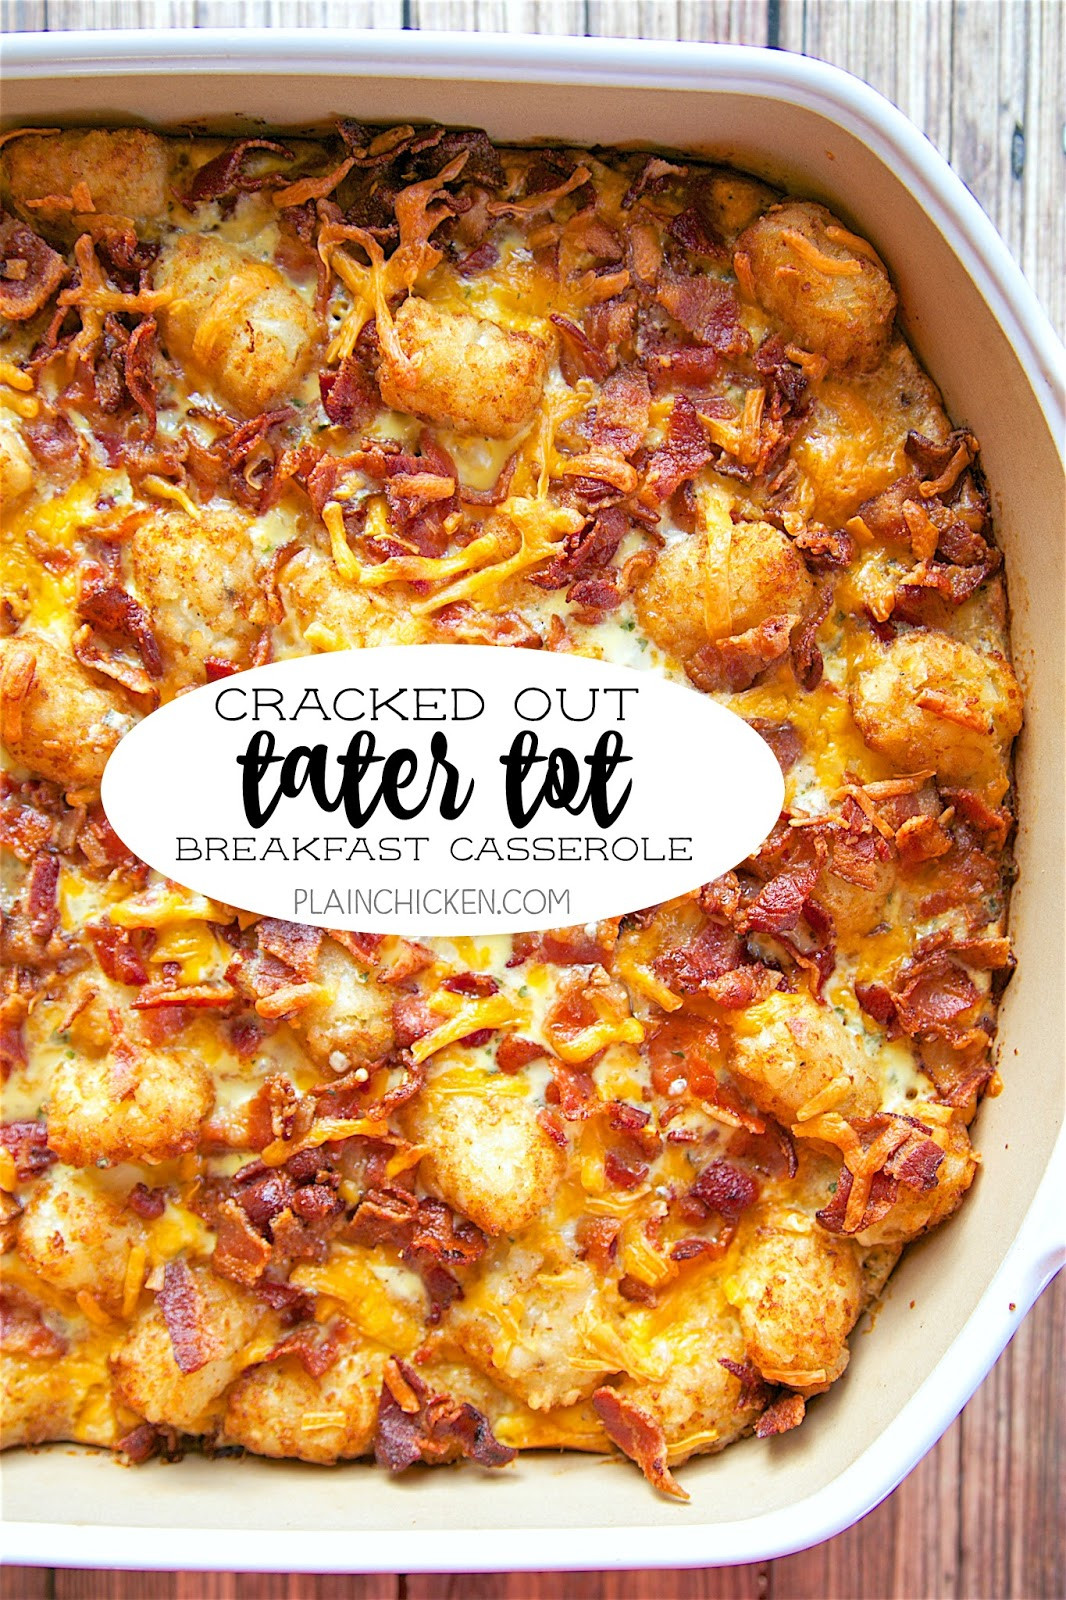 Breakfast Casserole With Tater Tots And Bacon
 Cracked Out Tater Tot Breakfast Casserole